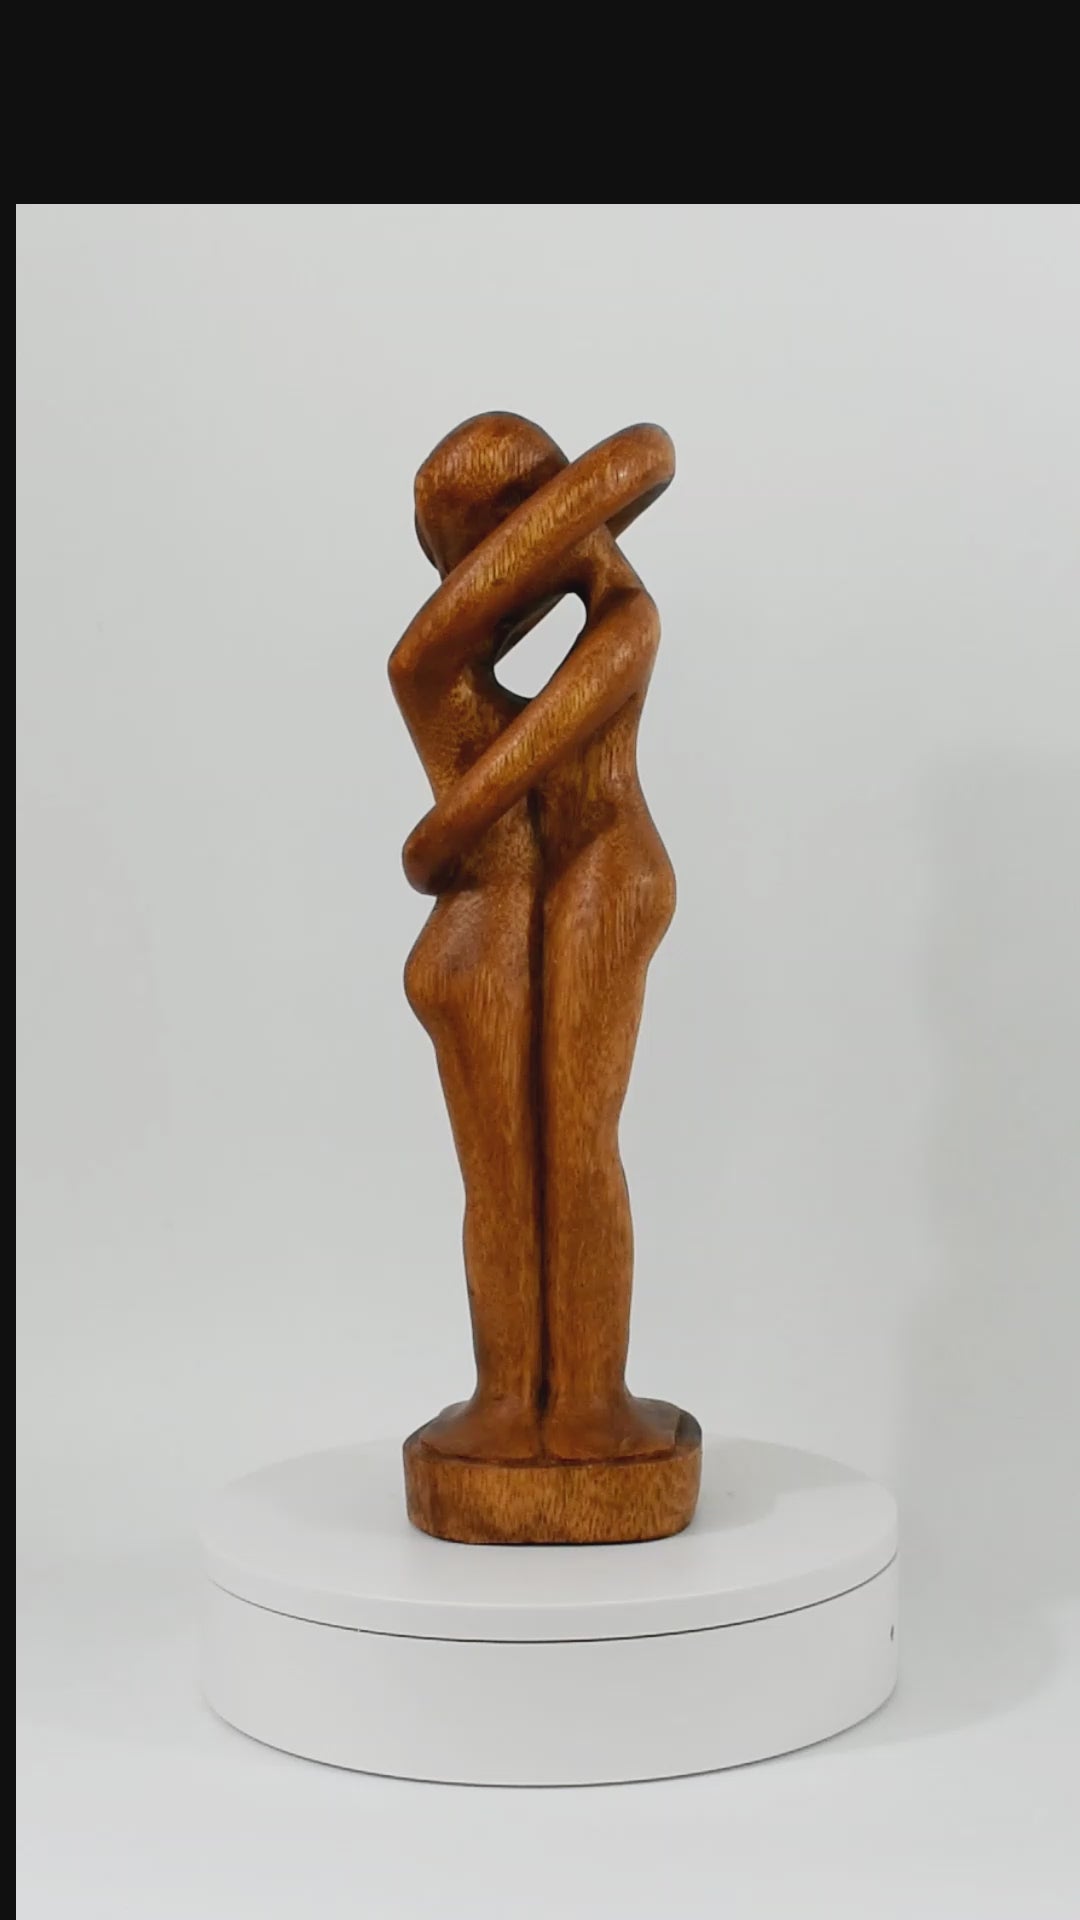 12" Wooden Handmade Abstract Sculpture Statue Handcrafted "Everlasting Love" Gift Art Decorative Home Decor Figurine Accent Decoration Hand Carved